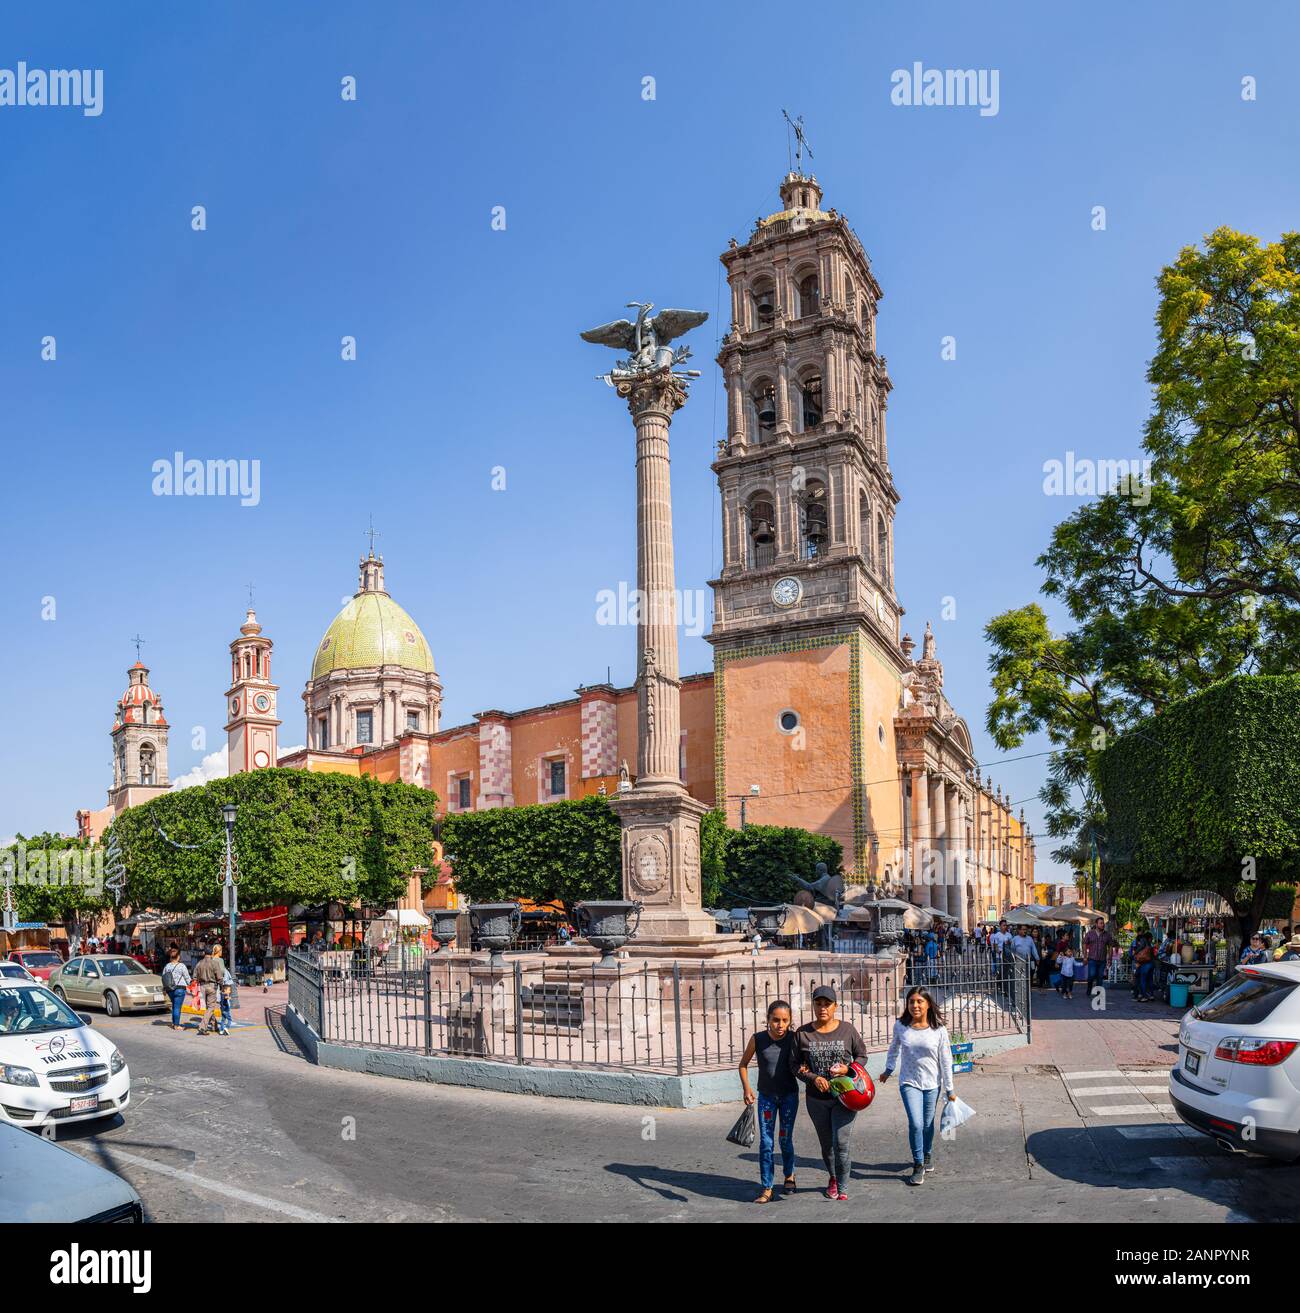 Celaya, Guanajuato, Mexico - November 24, 2019: Tourists and locals around the Immaculate Conception Cathedral, with the Independence column at the fr Stock Photo